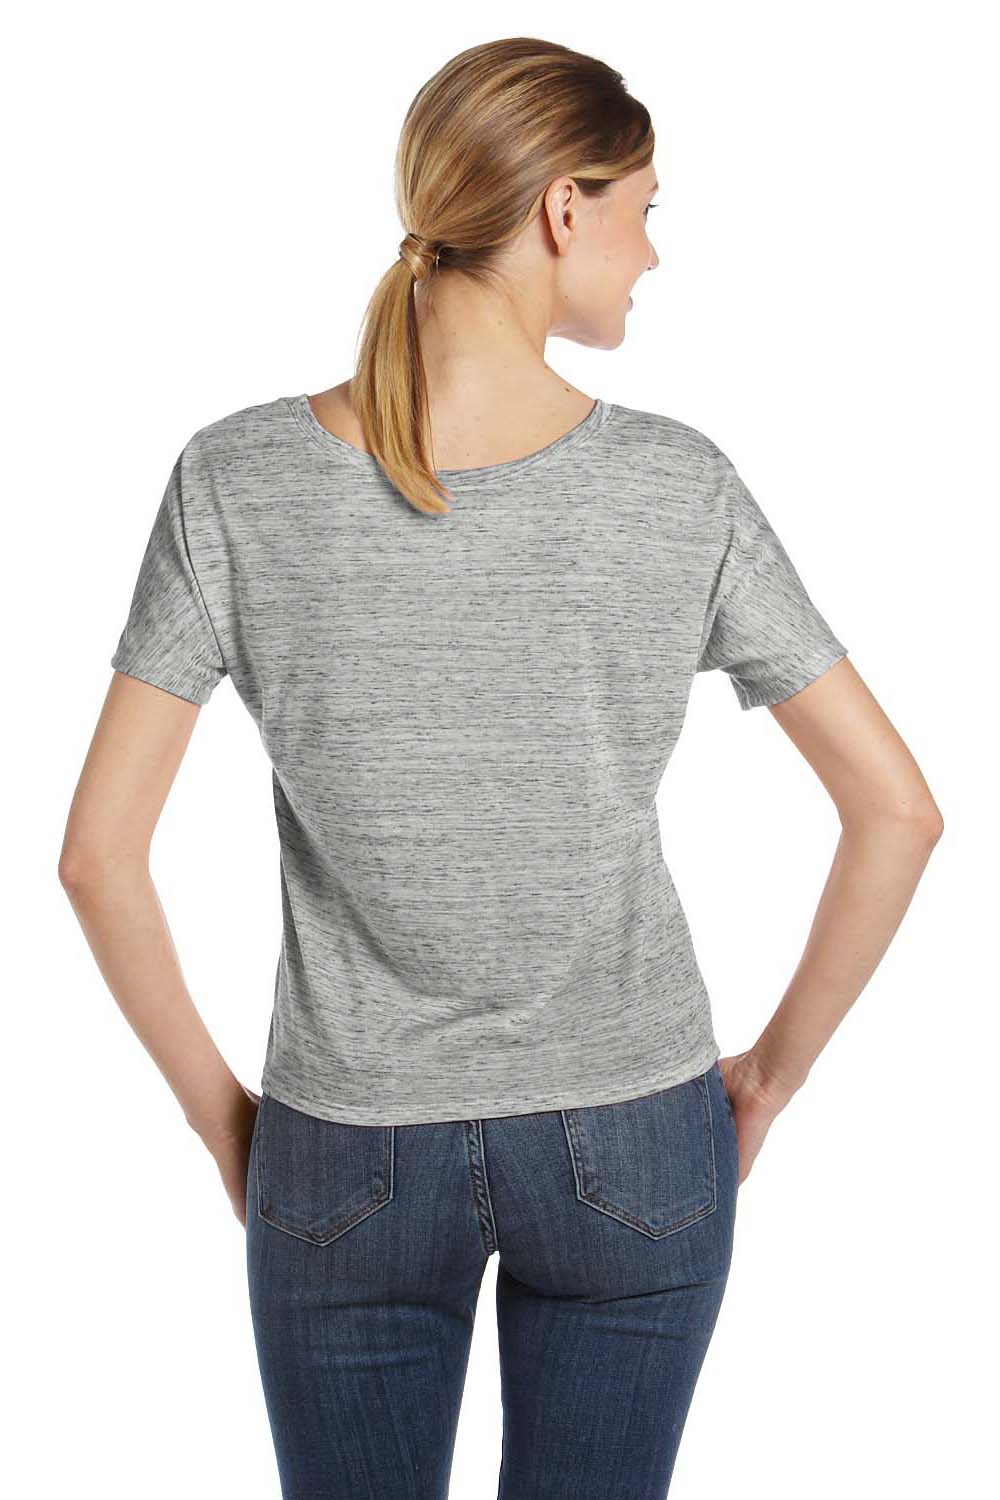 Bella + Canvas BC8816/8816 Womens Slouchy Short Sleeve Wide Neck T-Shirt White Marble Model Back